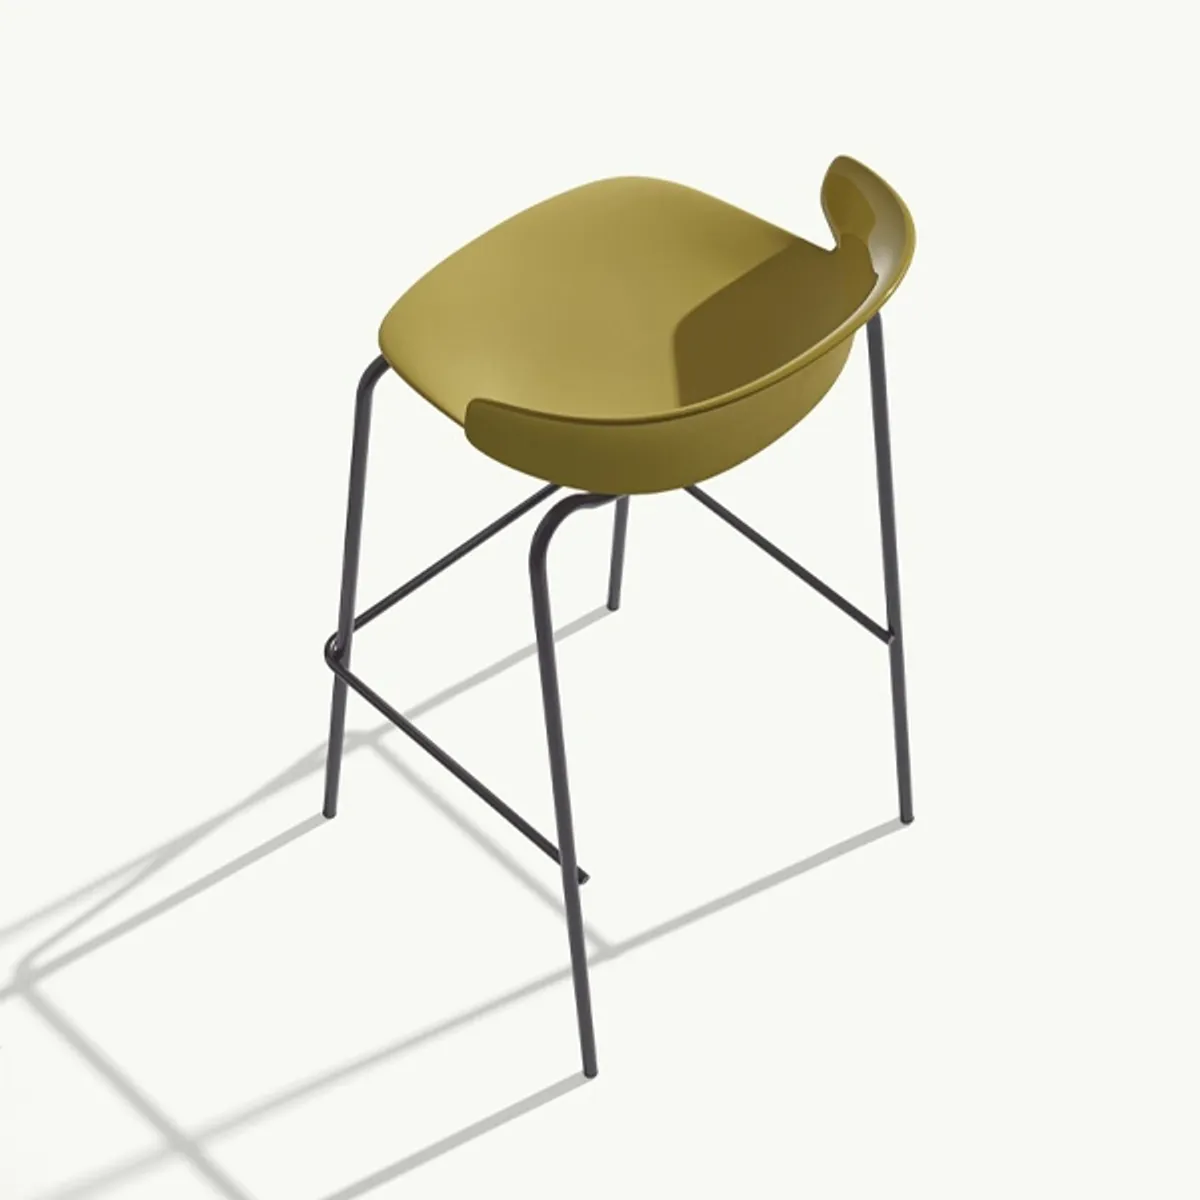 Classy bar stool Inside Out Contracts5